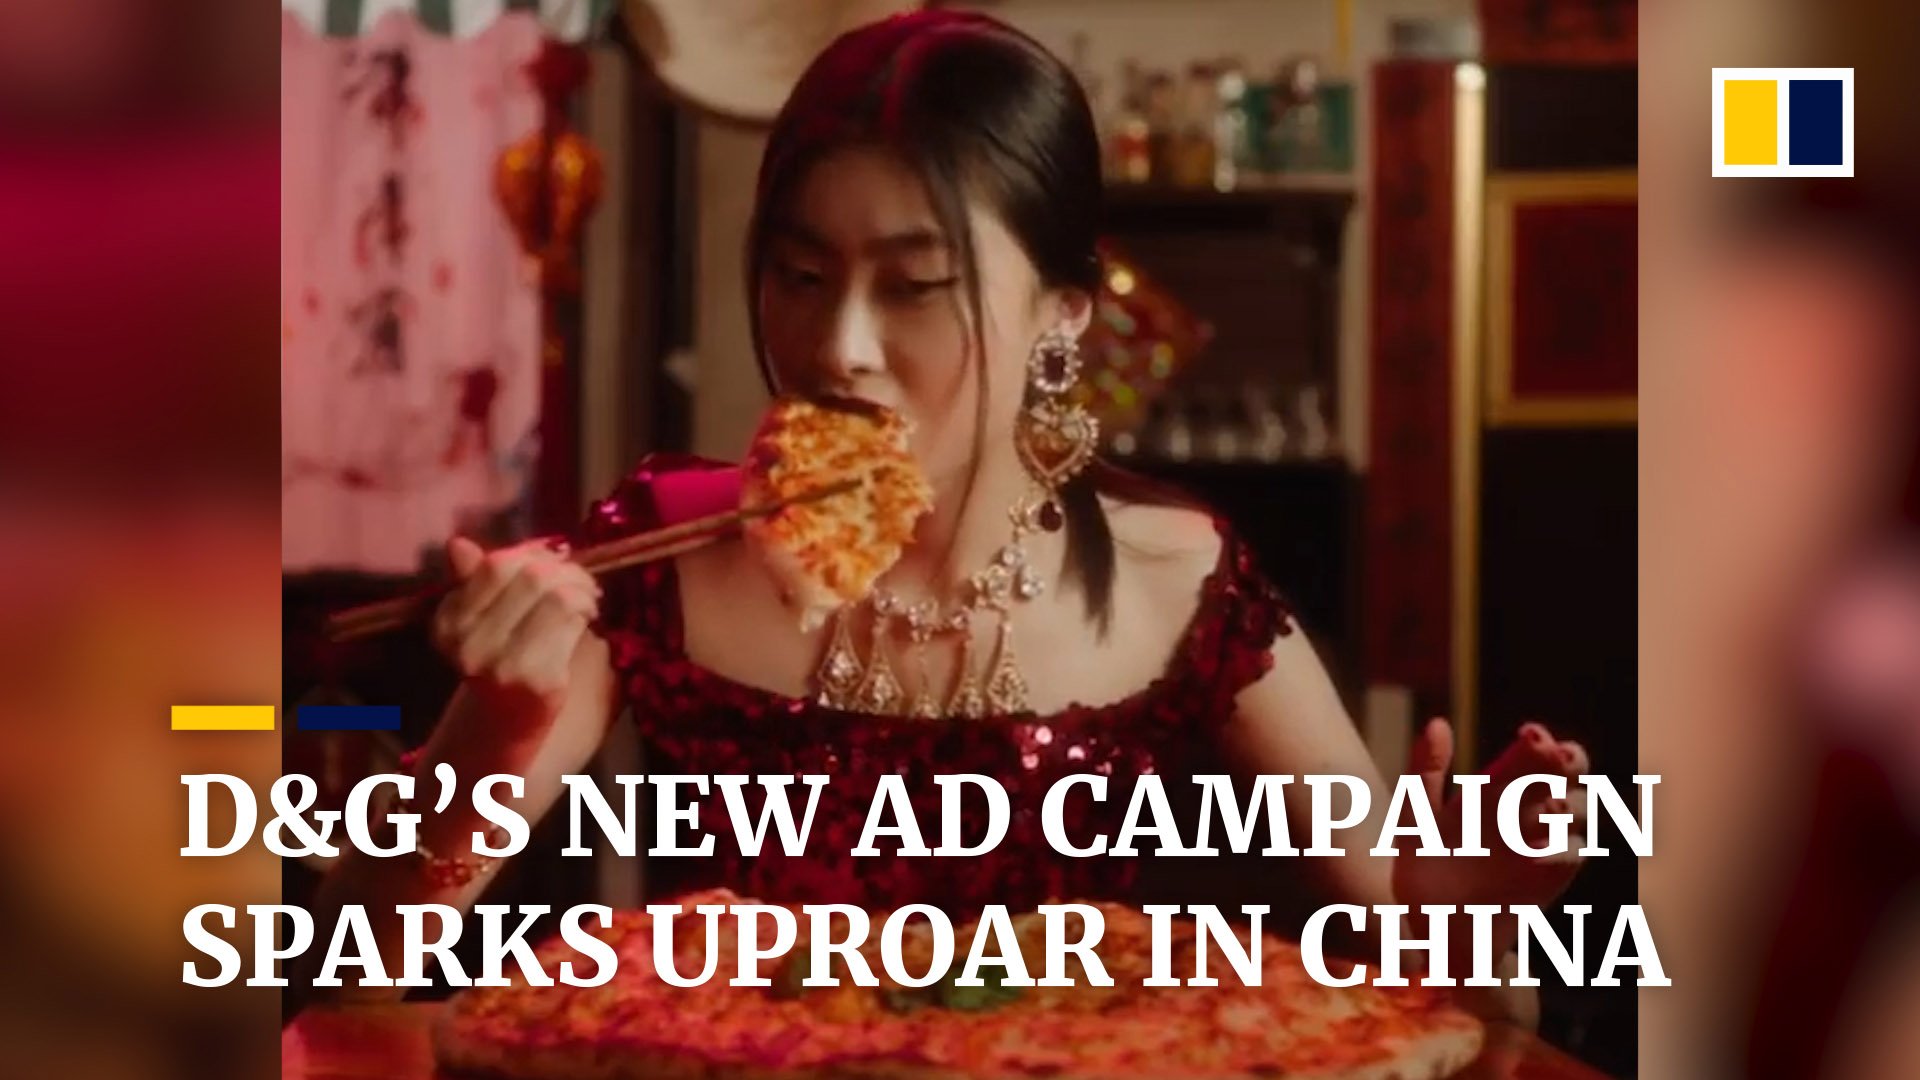 Dolce & Gabbana advert completely ruined my career, says Chinese model Zuo  Ye as she breaks her silence over race row | South China Morning Post